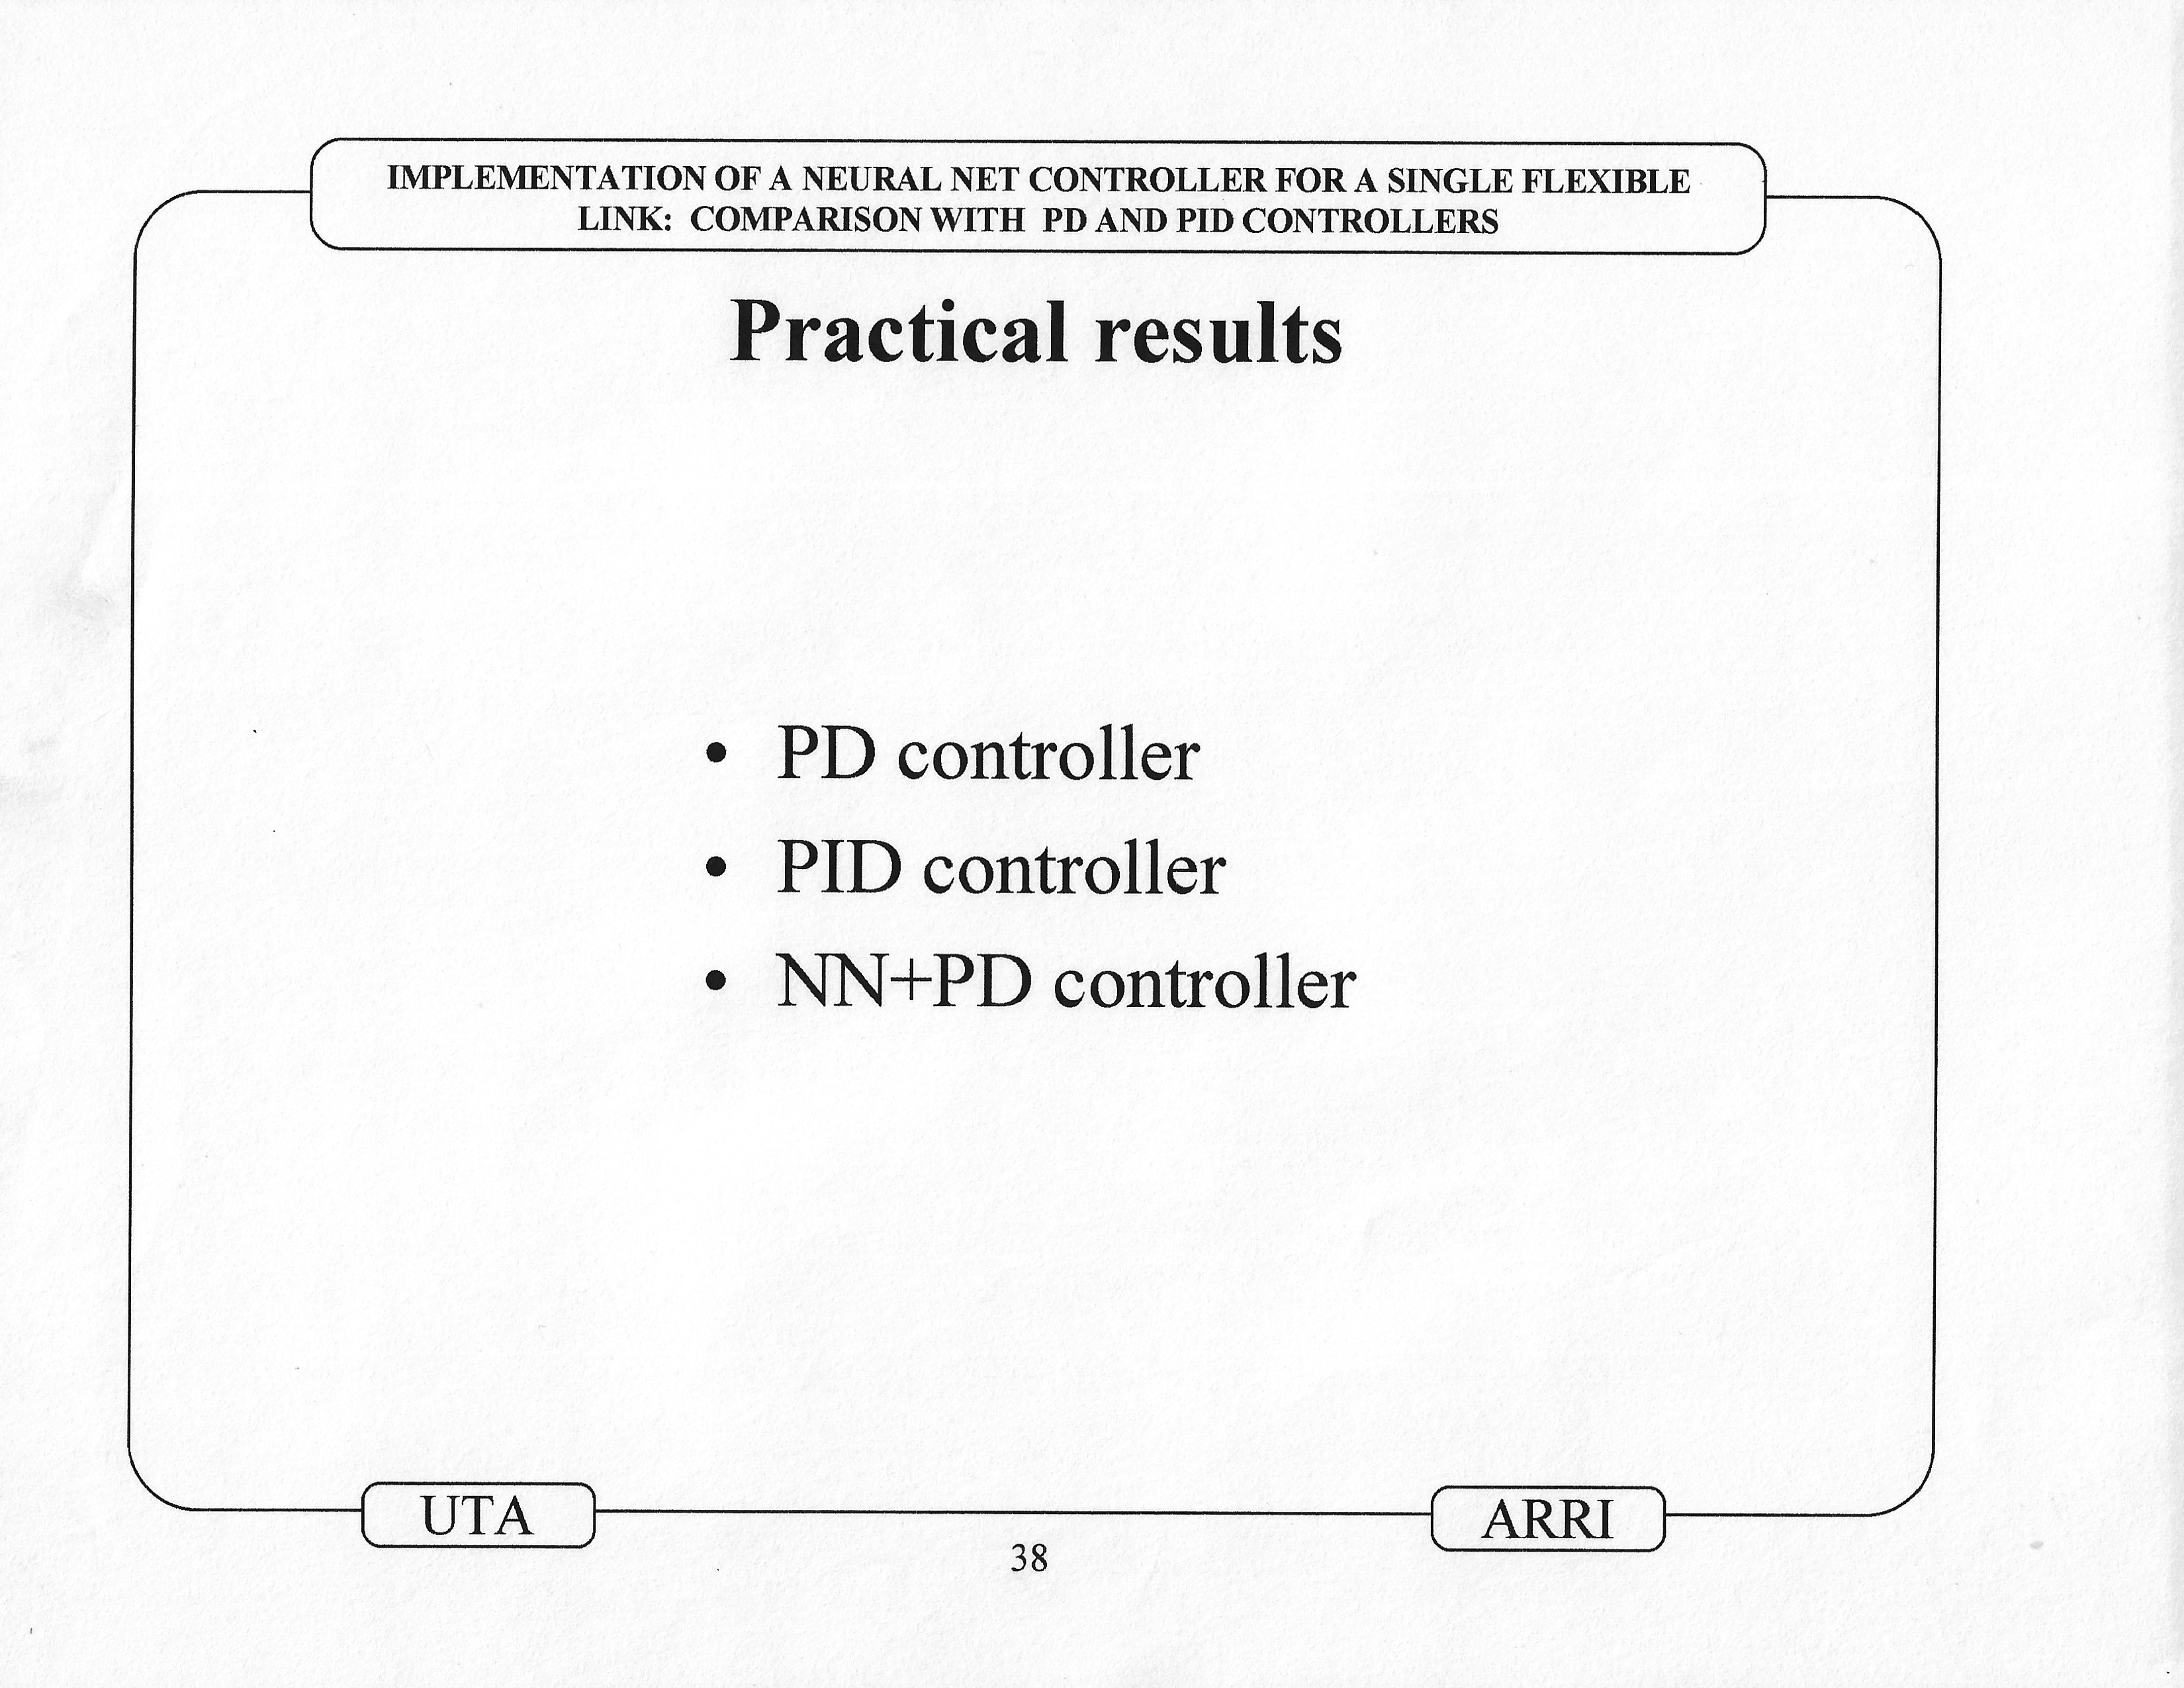 960724_Gutierrez_1996_Implementation_of_a_Neural_Net_Tracking_Controller_for_a_Single_Flexible_Link_Comparison_with_PD_and_PID_controllers_presentation_37